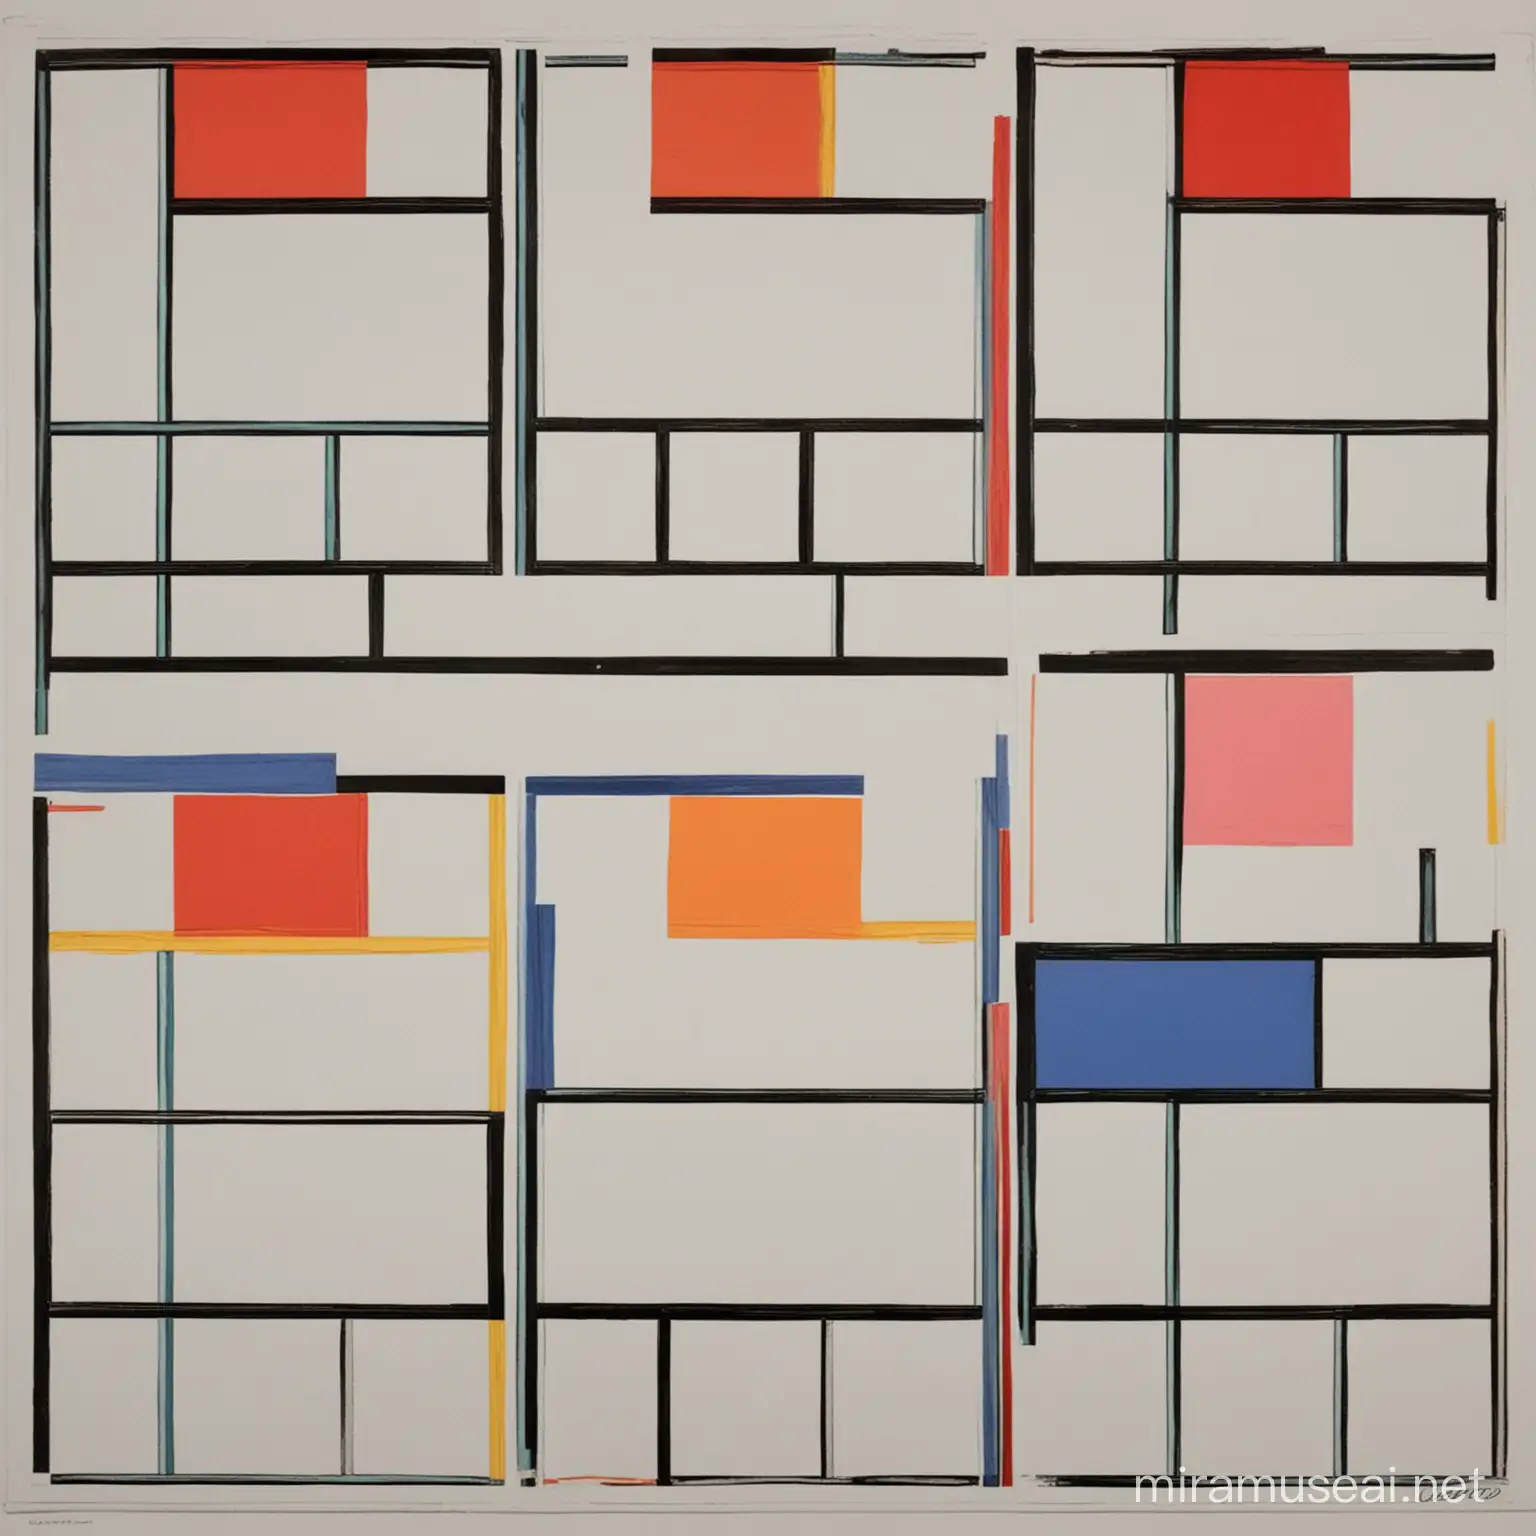 Combining the style of Warhol and Mondrian